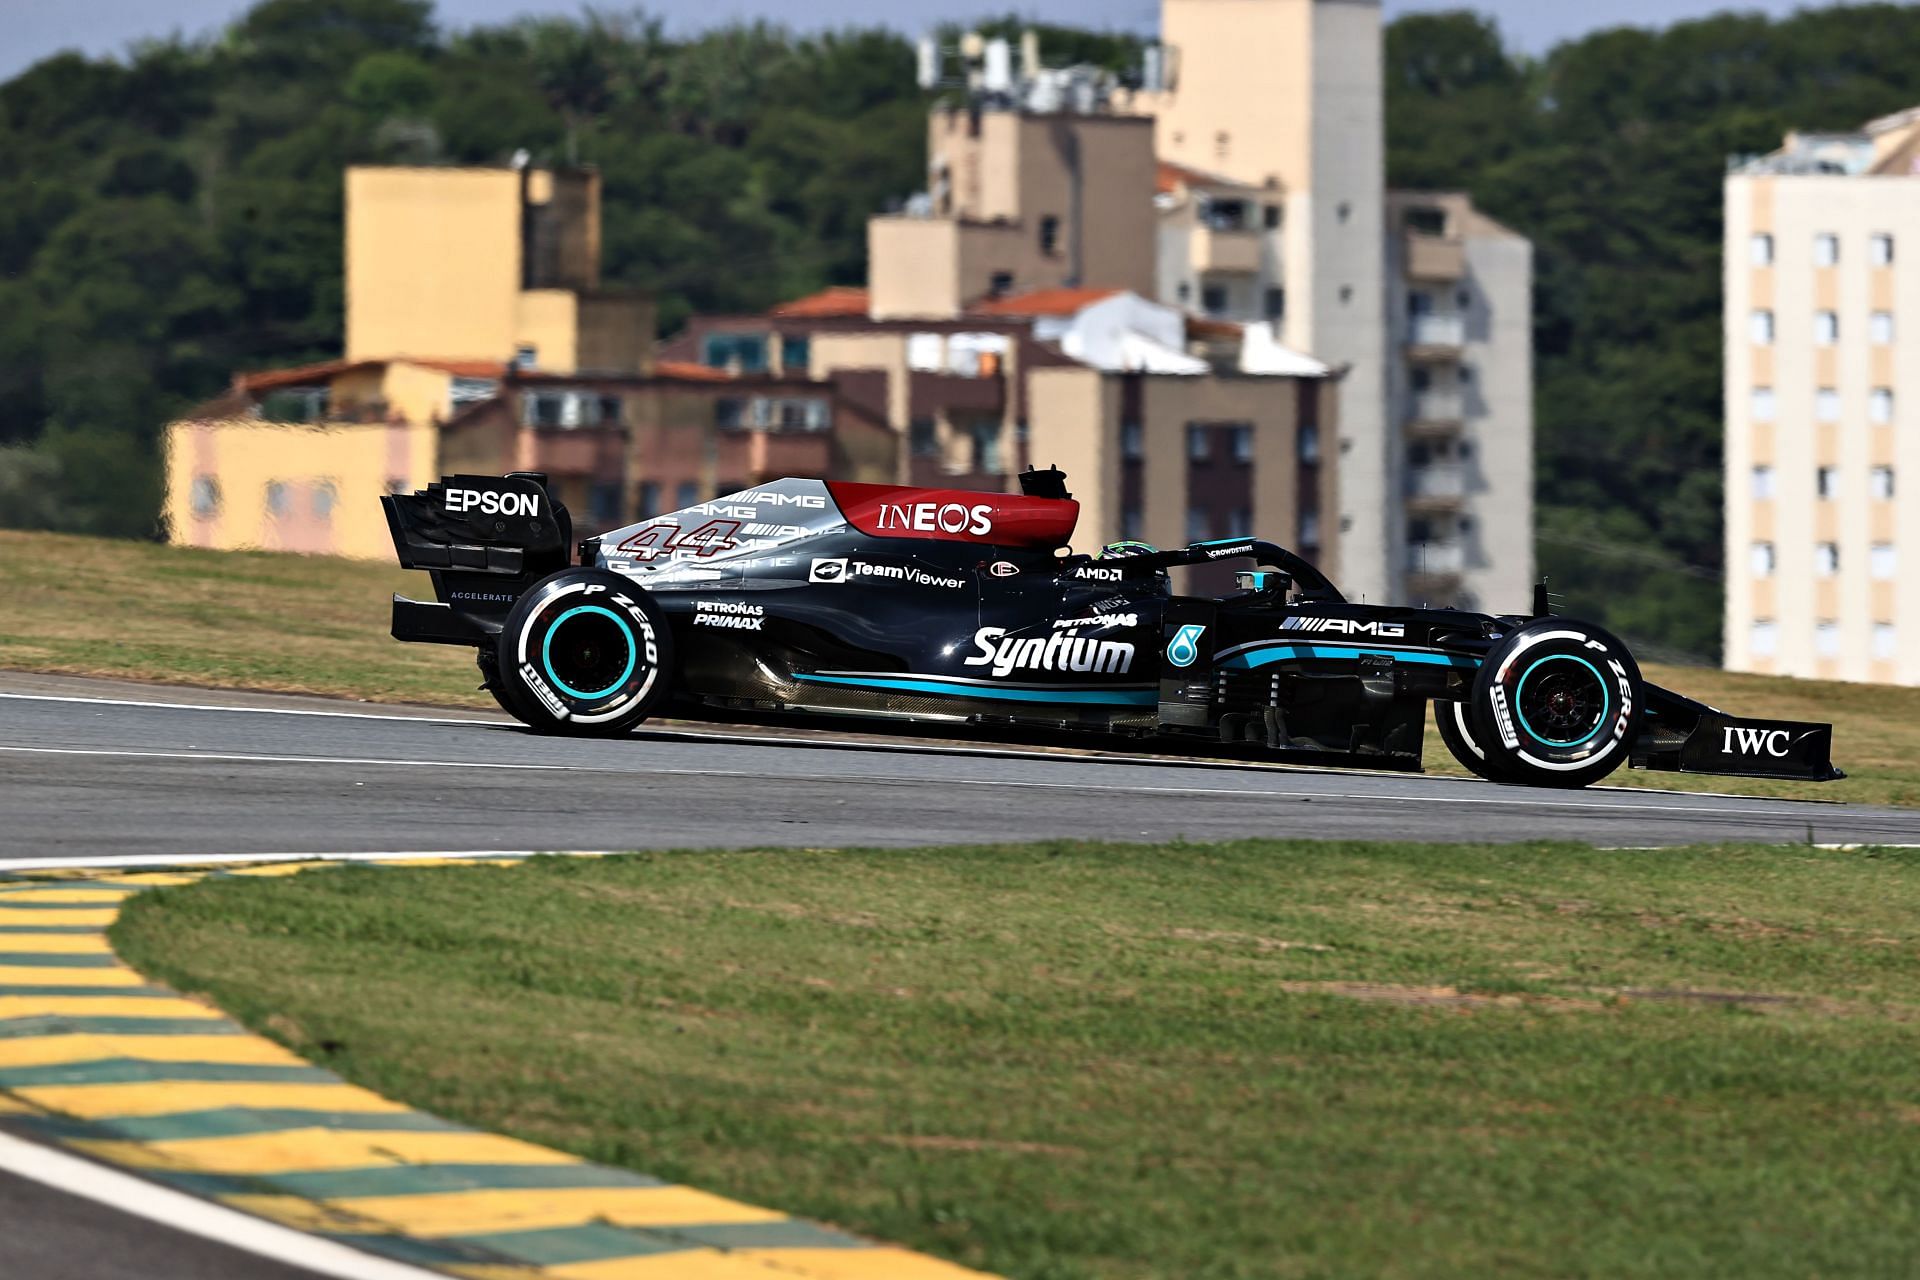 Lewis Hamilton in action at the 2021 Brazil Grand Prix. (Photo by Buda Mendes/Getty Images)